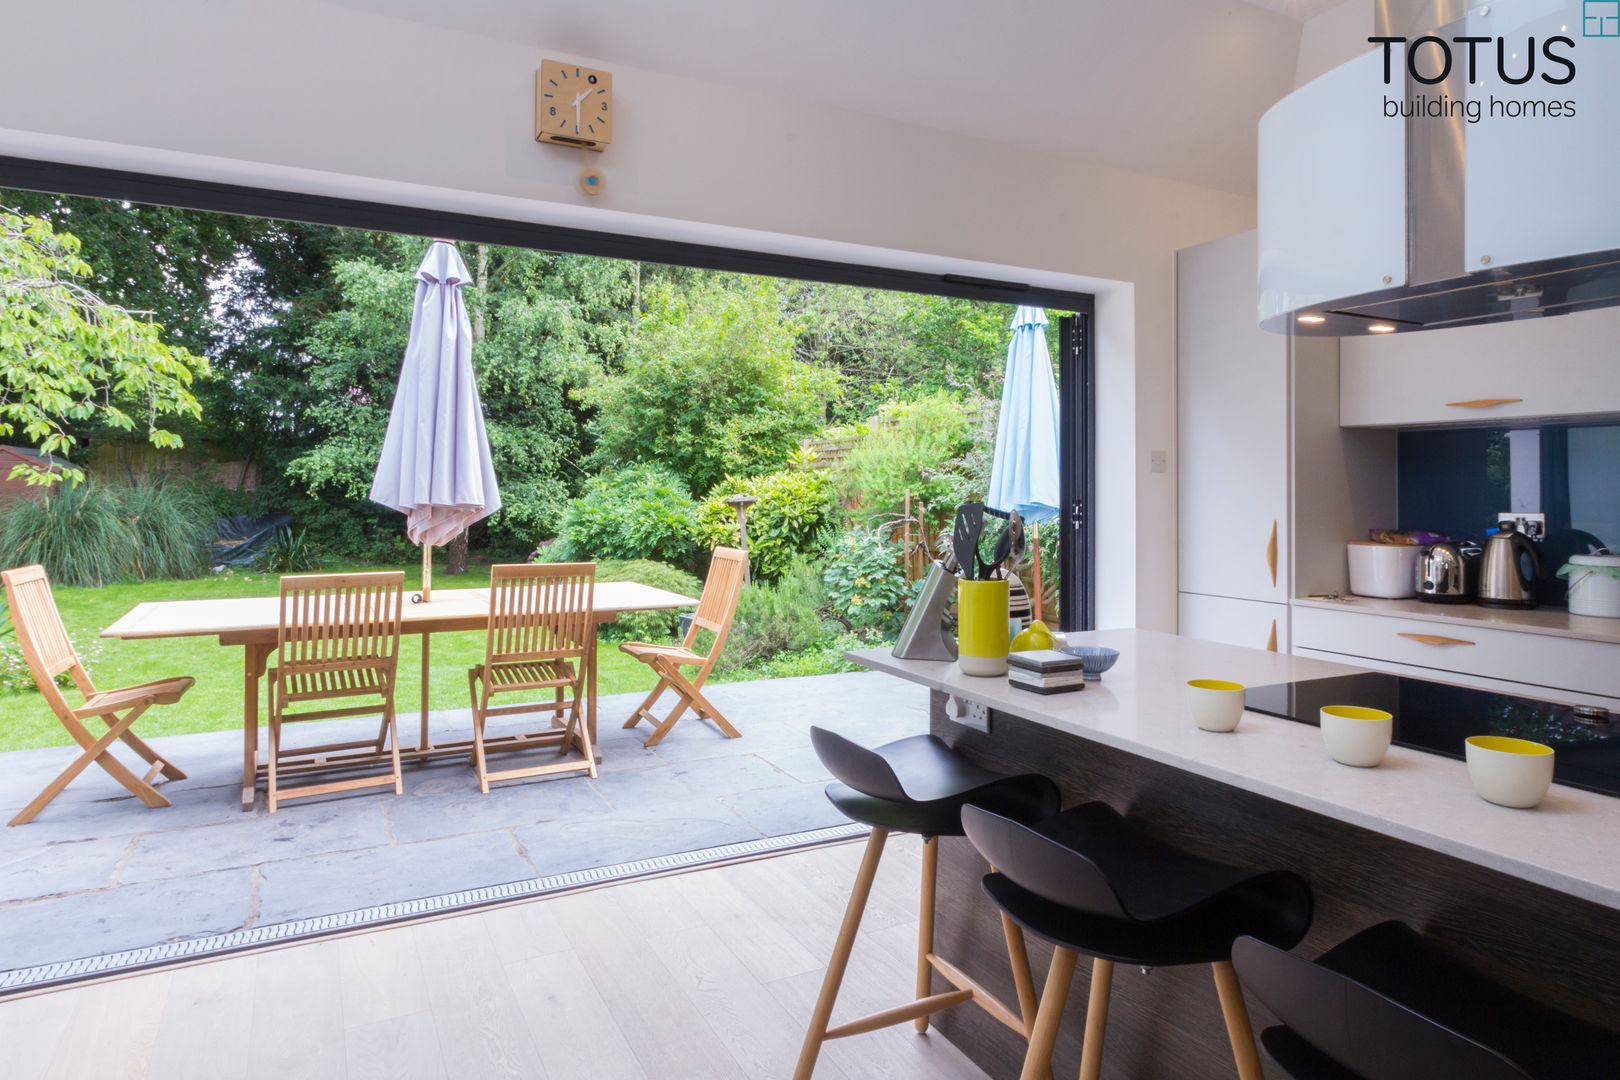 New life for a 1920s home - extension and full renovation, Thames Ditton, Surrey, TOTUS TOTUS Cozinhas modernas